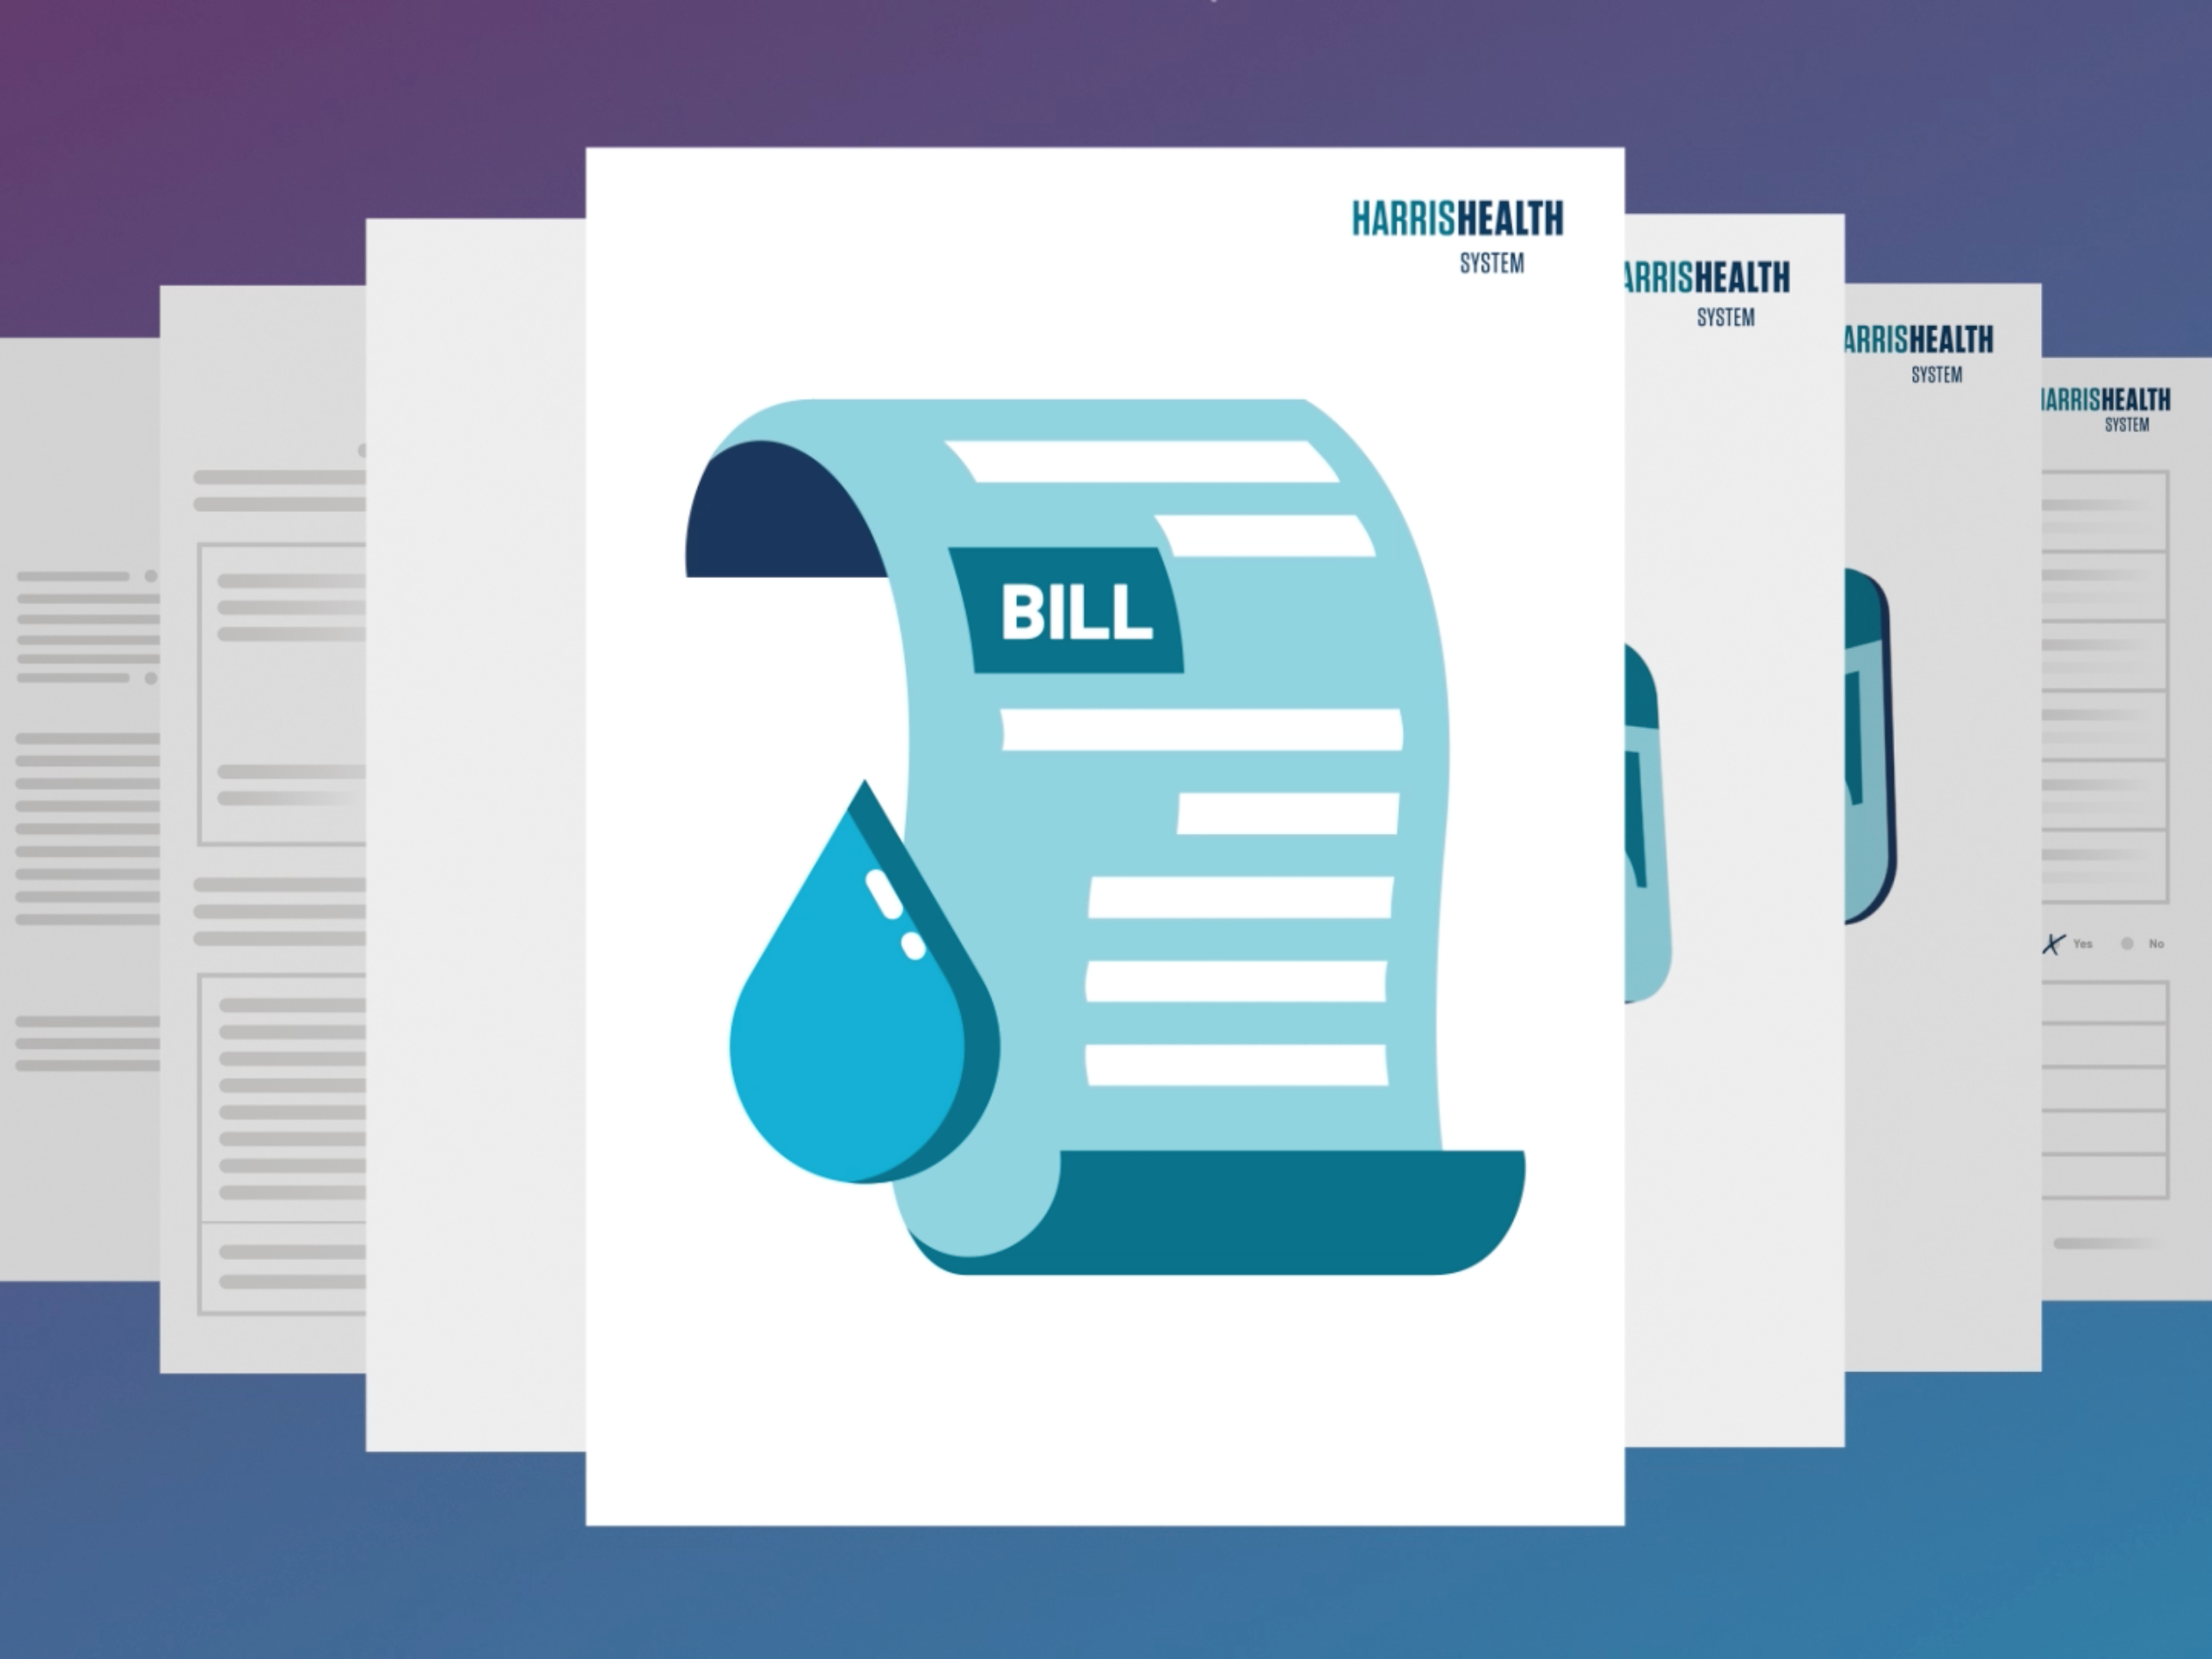 Illustration of a medical bill from Harris Health System with a water droplet icon, indicating healthcare billing documents.